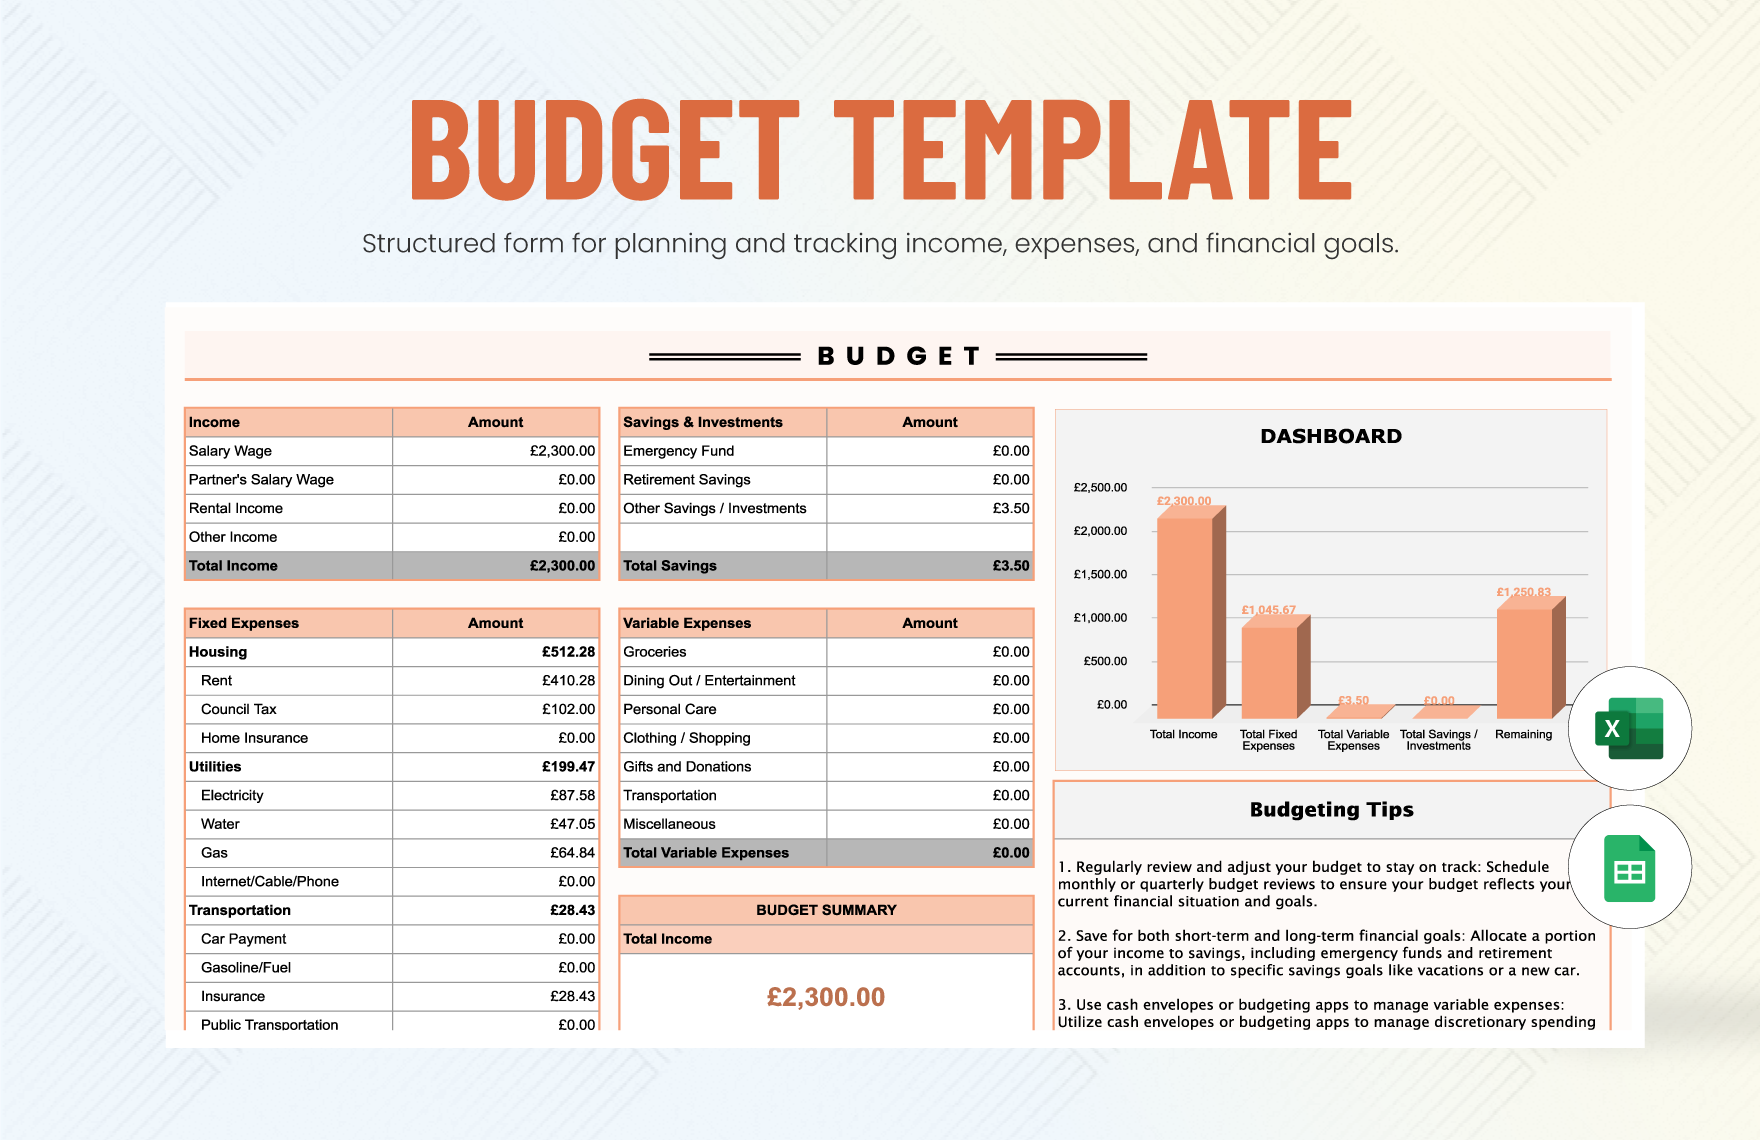 Free Budget Template in Excel, Google Sheets